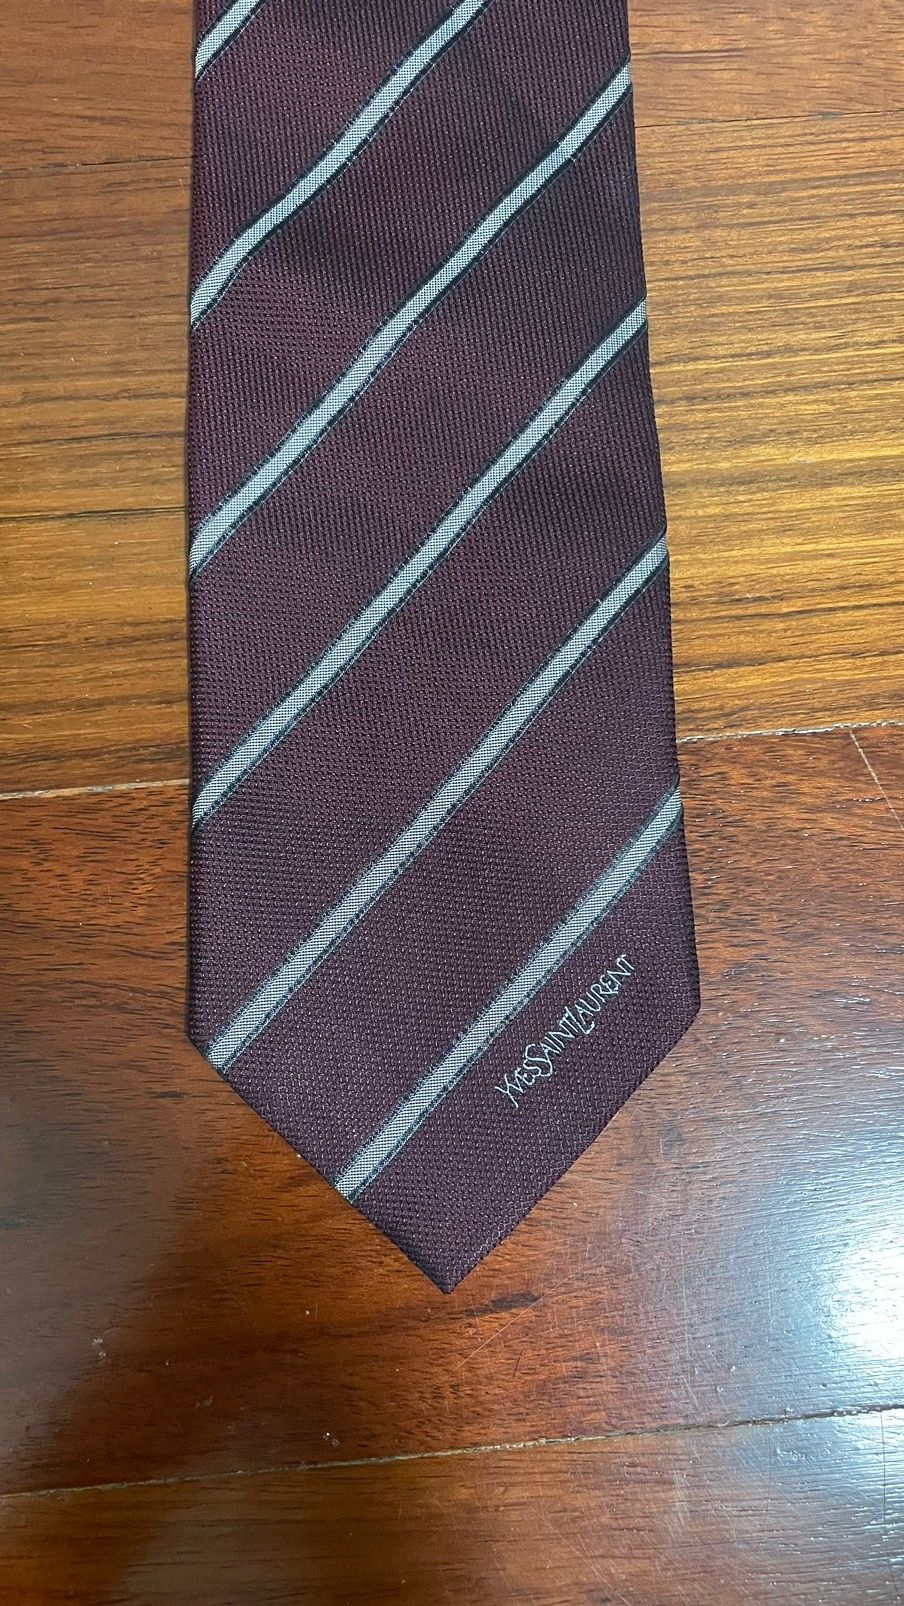 Yves Saint Laurent YSL Burgundy Tie Size ONE SIZE - 1 Preview